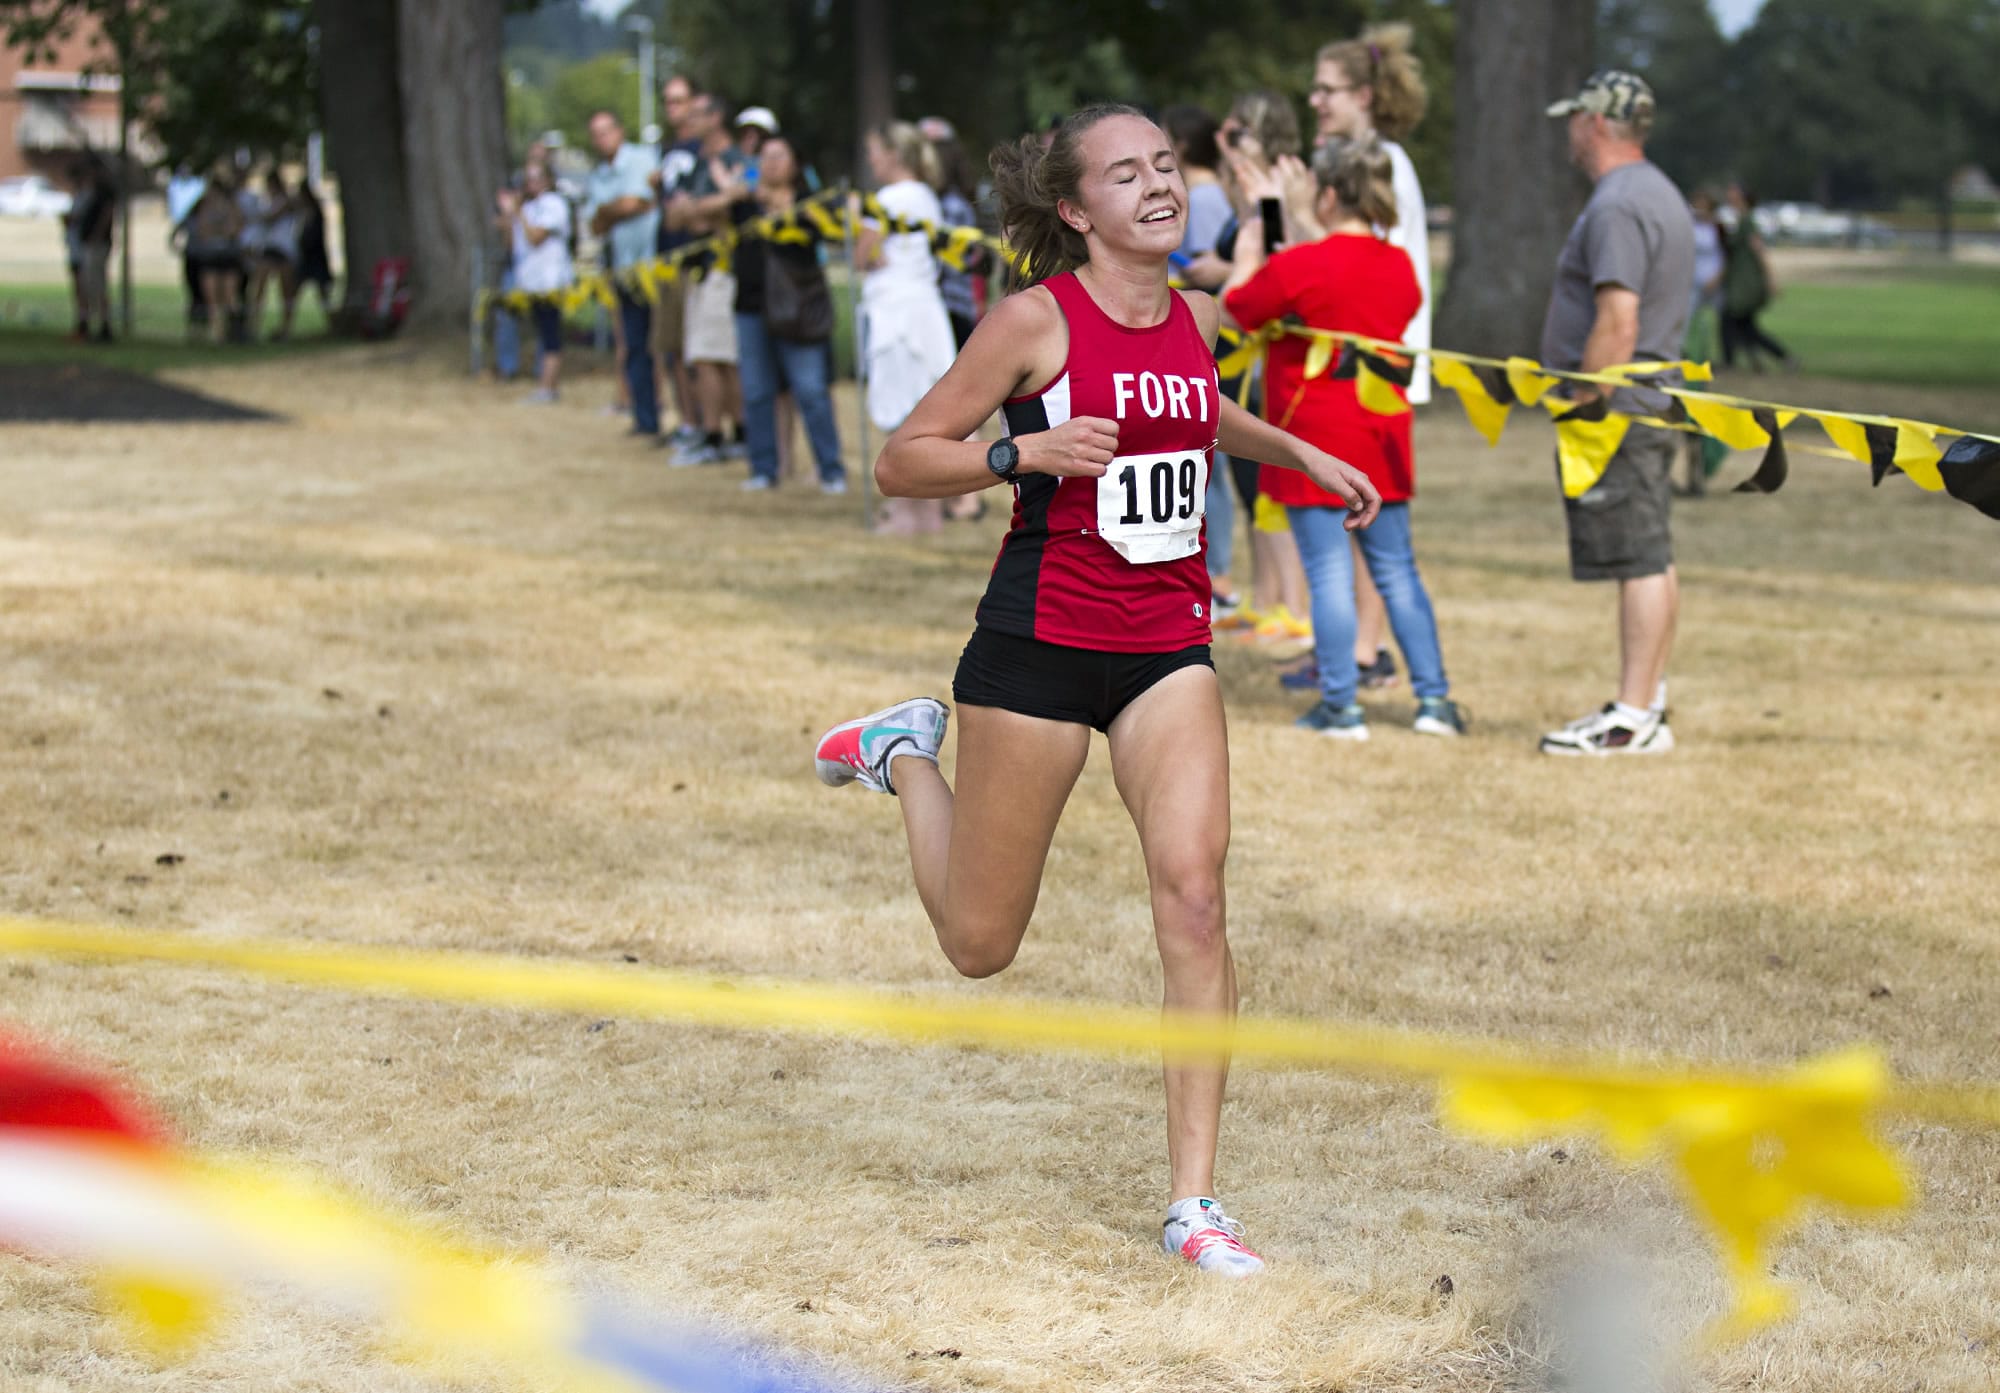 Fort Vancouver junior Emily Phelps (109) crosses the finish line with her eyes closed and a smile on her face in first place in the annual Run-A-Ree for varsity women's with a time of 18 minutes, 51 seconds at Hudson's Bay High School in Vancouver on Friday, Sept. 8, 2017.